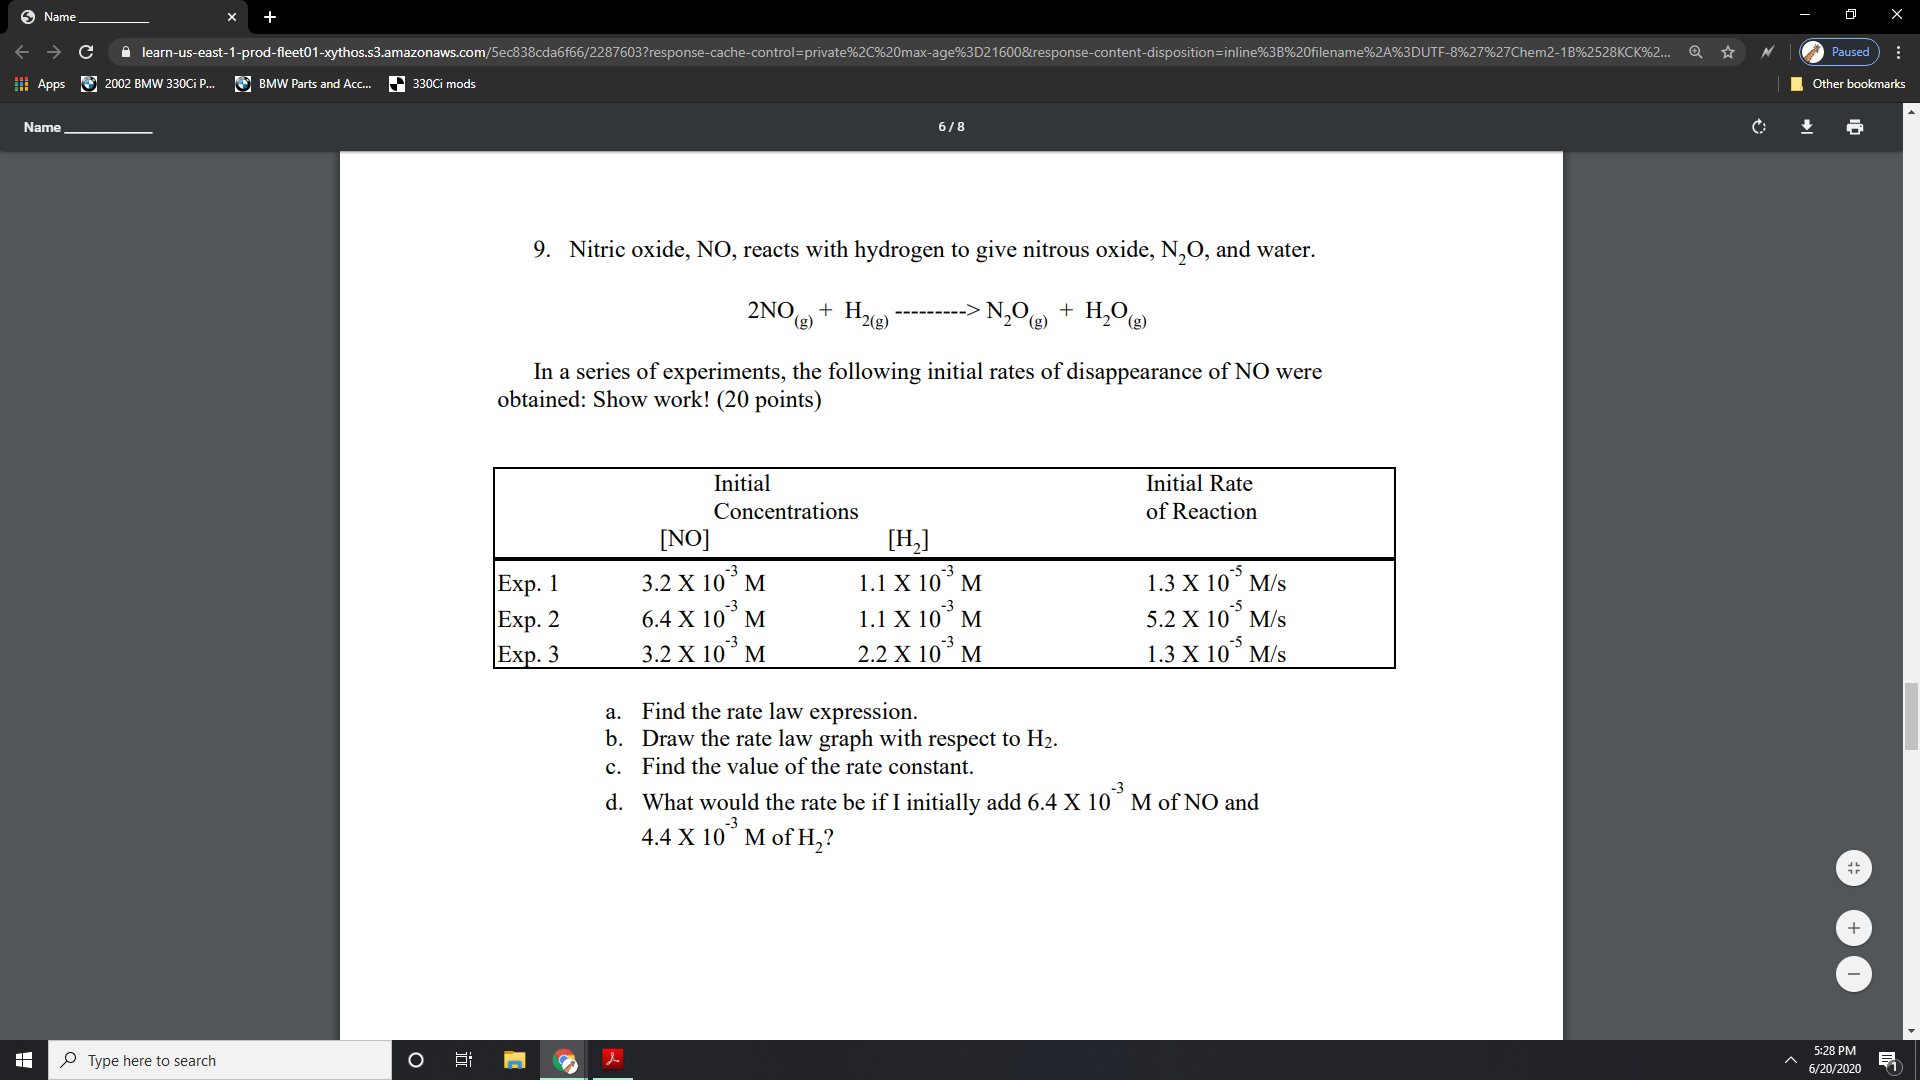 9. Nitric oxide, NO, reacts with hydrogen to give nitrous oxide, N,O, and water.
2NO + H,
2(g)
N,0 + H,O
(3)
(g)
In a series of experiments, the following initial rates of disappearance of NO were
obtained: Show work! (20 points)
Initial
Initial Rate
Concentrations
of Reaction
[NO]
[H,]
3.2 X 10° M
-3
1.1 X 10° M
-5
1.3 X 10° M/s
Exp. 1
|Exp. 2
Exp. 3
-5
5.2 X 10° M/s
-3
6.4 X 10° M
1.1 X 10° M
-5
3.2 X 10° M
2.2 X 10° M
1.3 X 10° M/s
a. Find the rate law expression.
b. Draw the rate law graph with respect to H2.
c. Find the value of the rate constant.
-3
d. What would the rate be if I initially add 6.4 X 10° M of NO and
4.4 X 10° M of H,?
